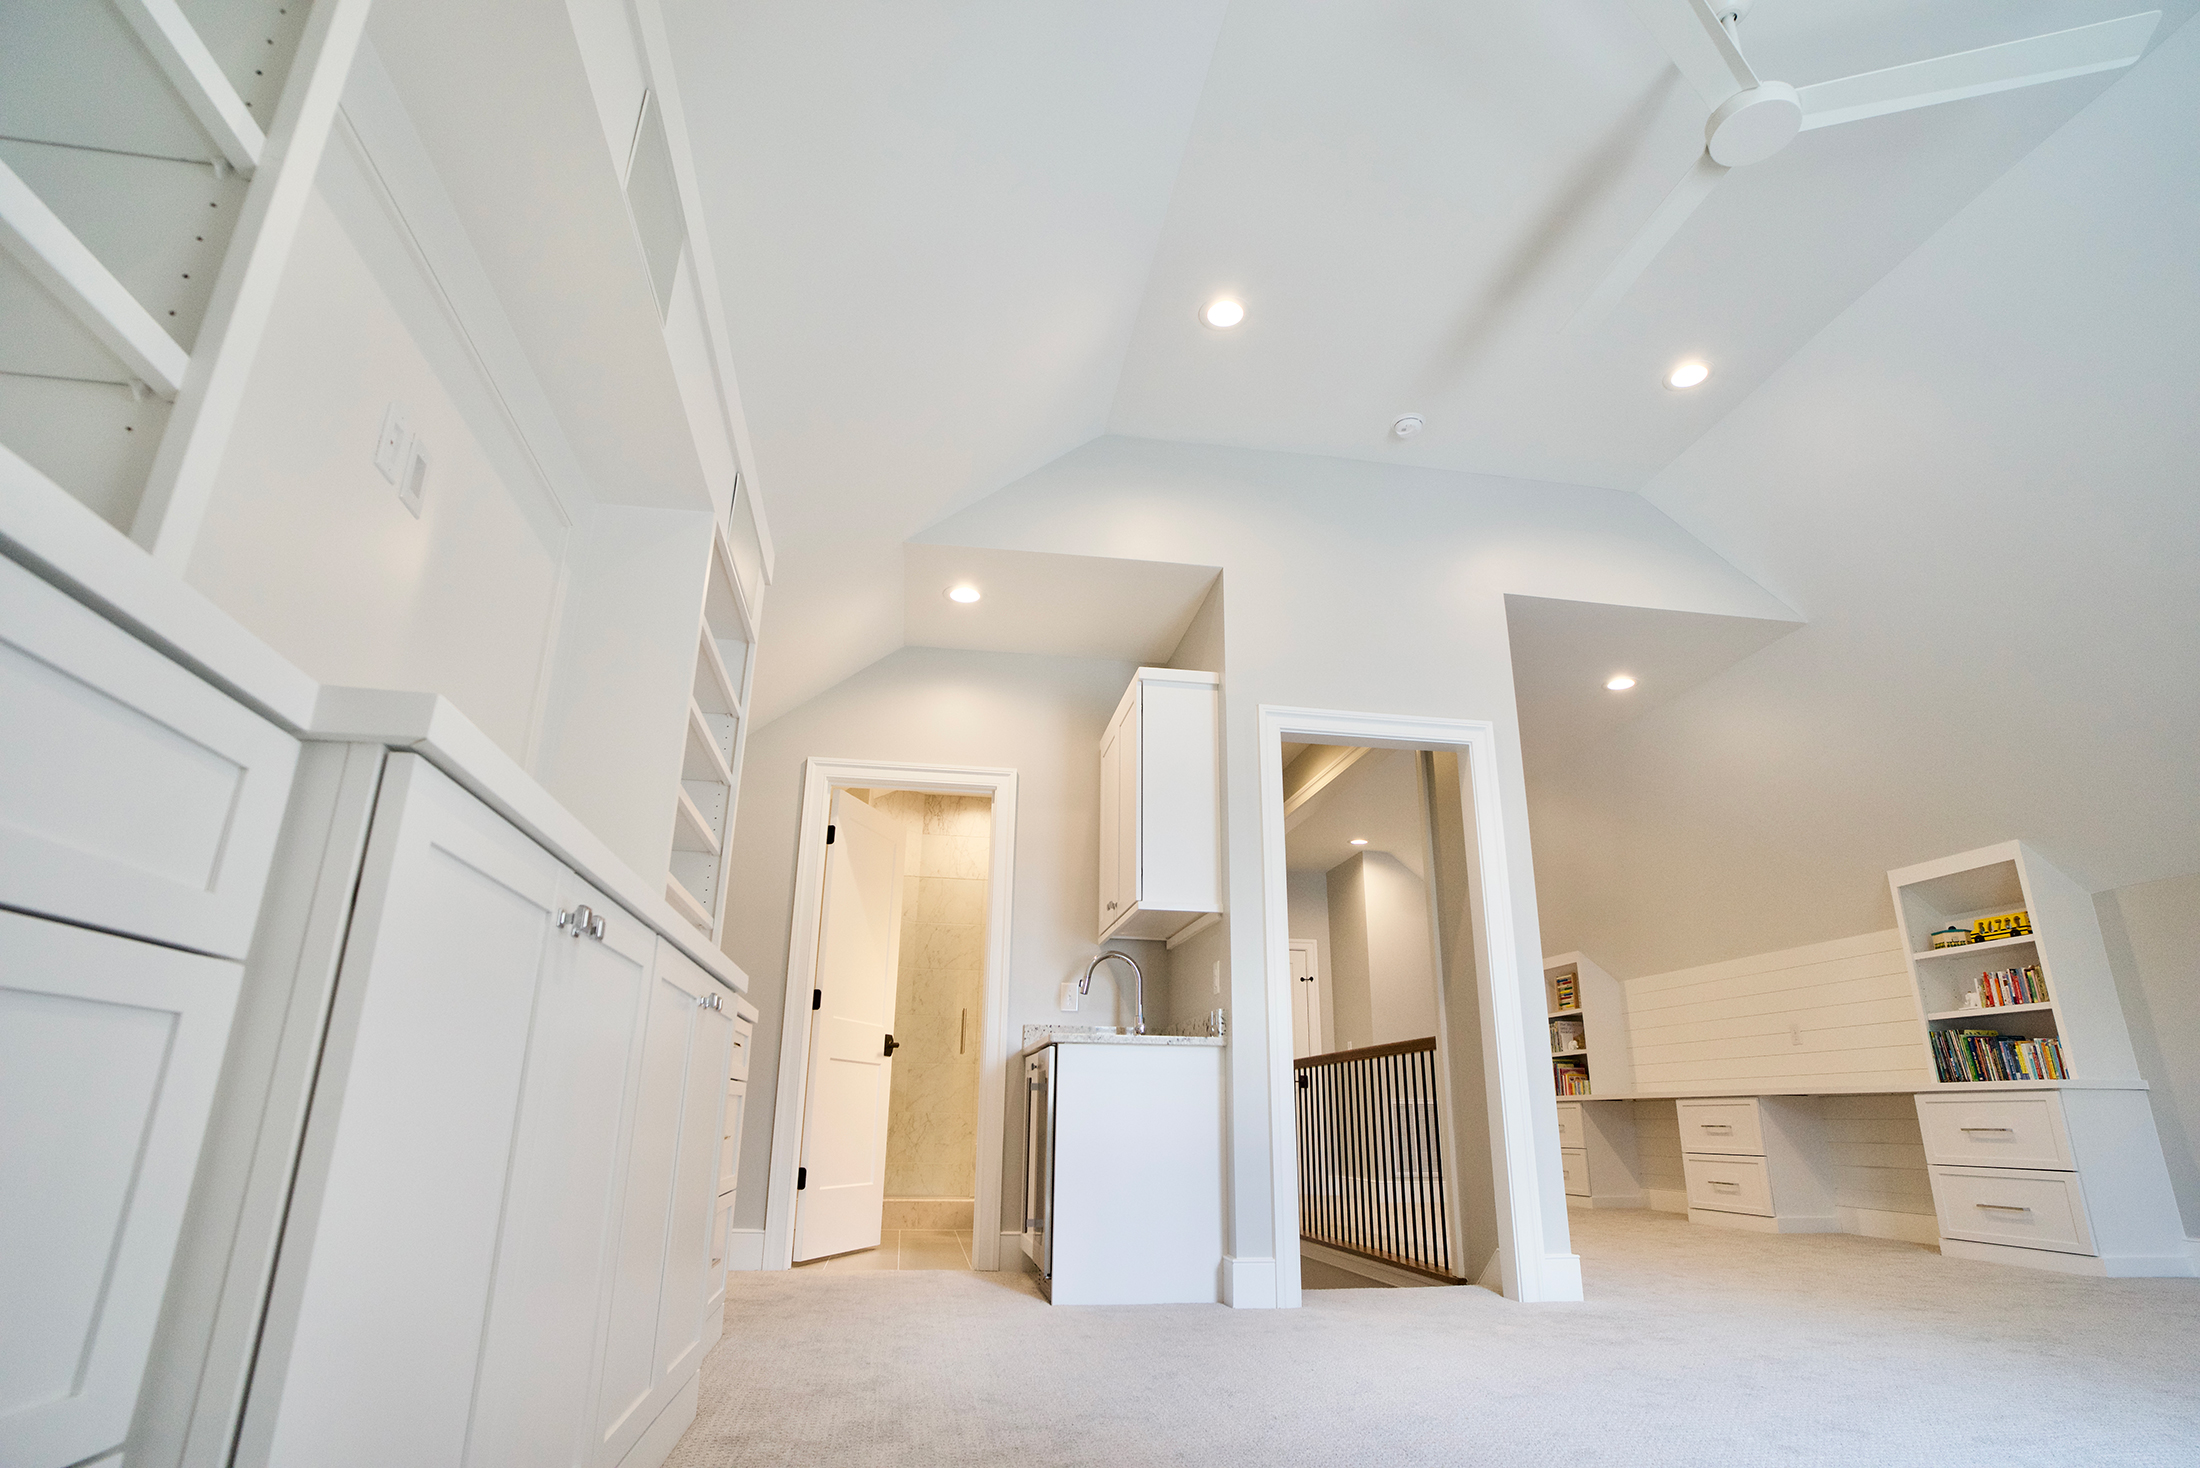 Full attic finish with full bathroom, wet bar, entertainment area, homeschool area, and large walk-on closet in North Raleigh